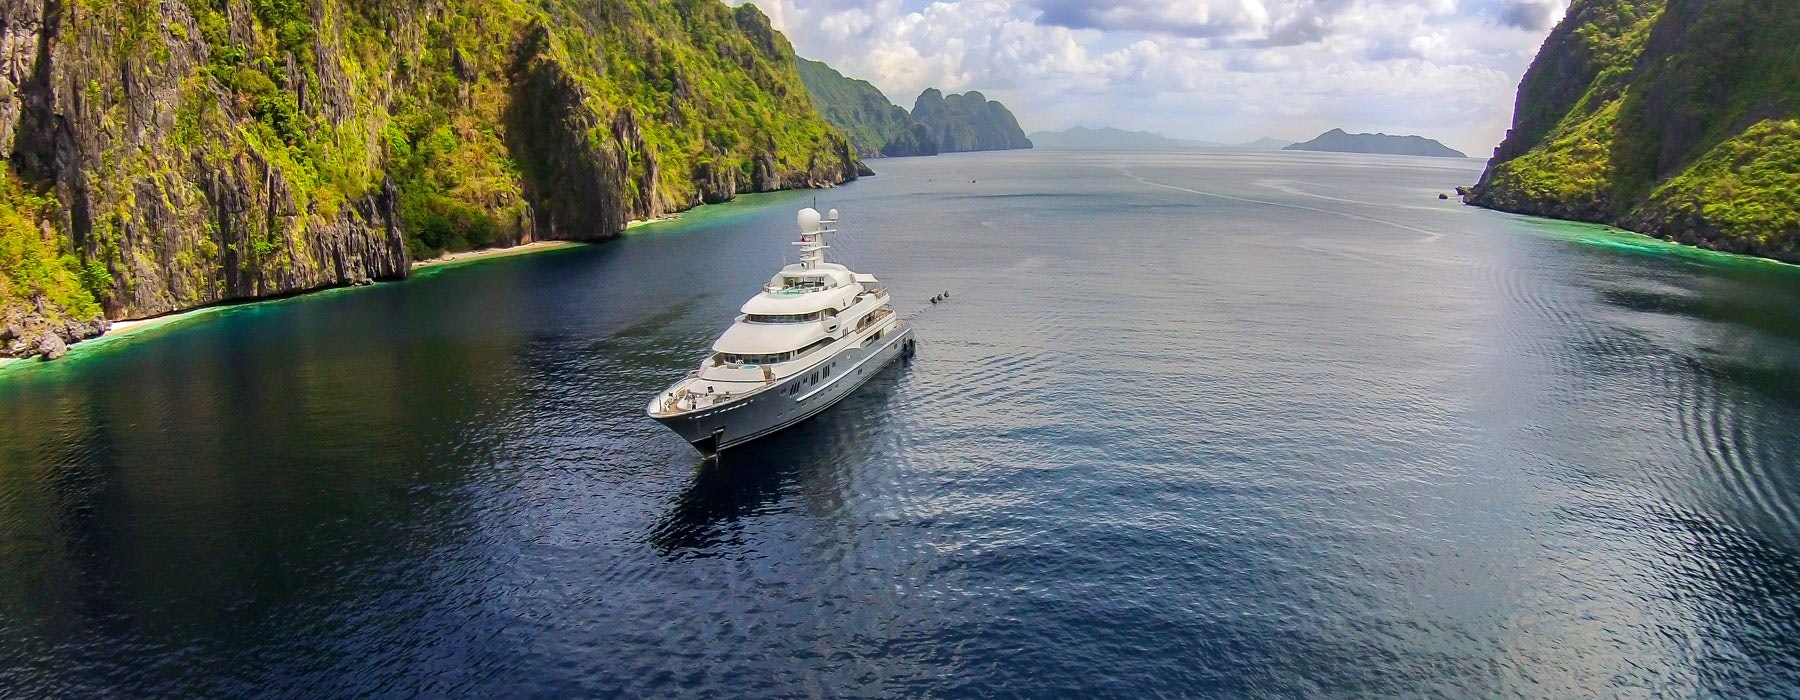 New Luxury Yachts Available For Sale